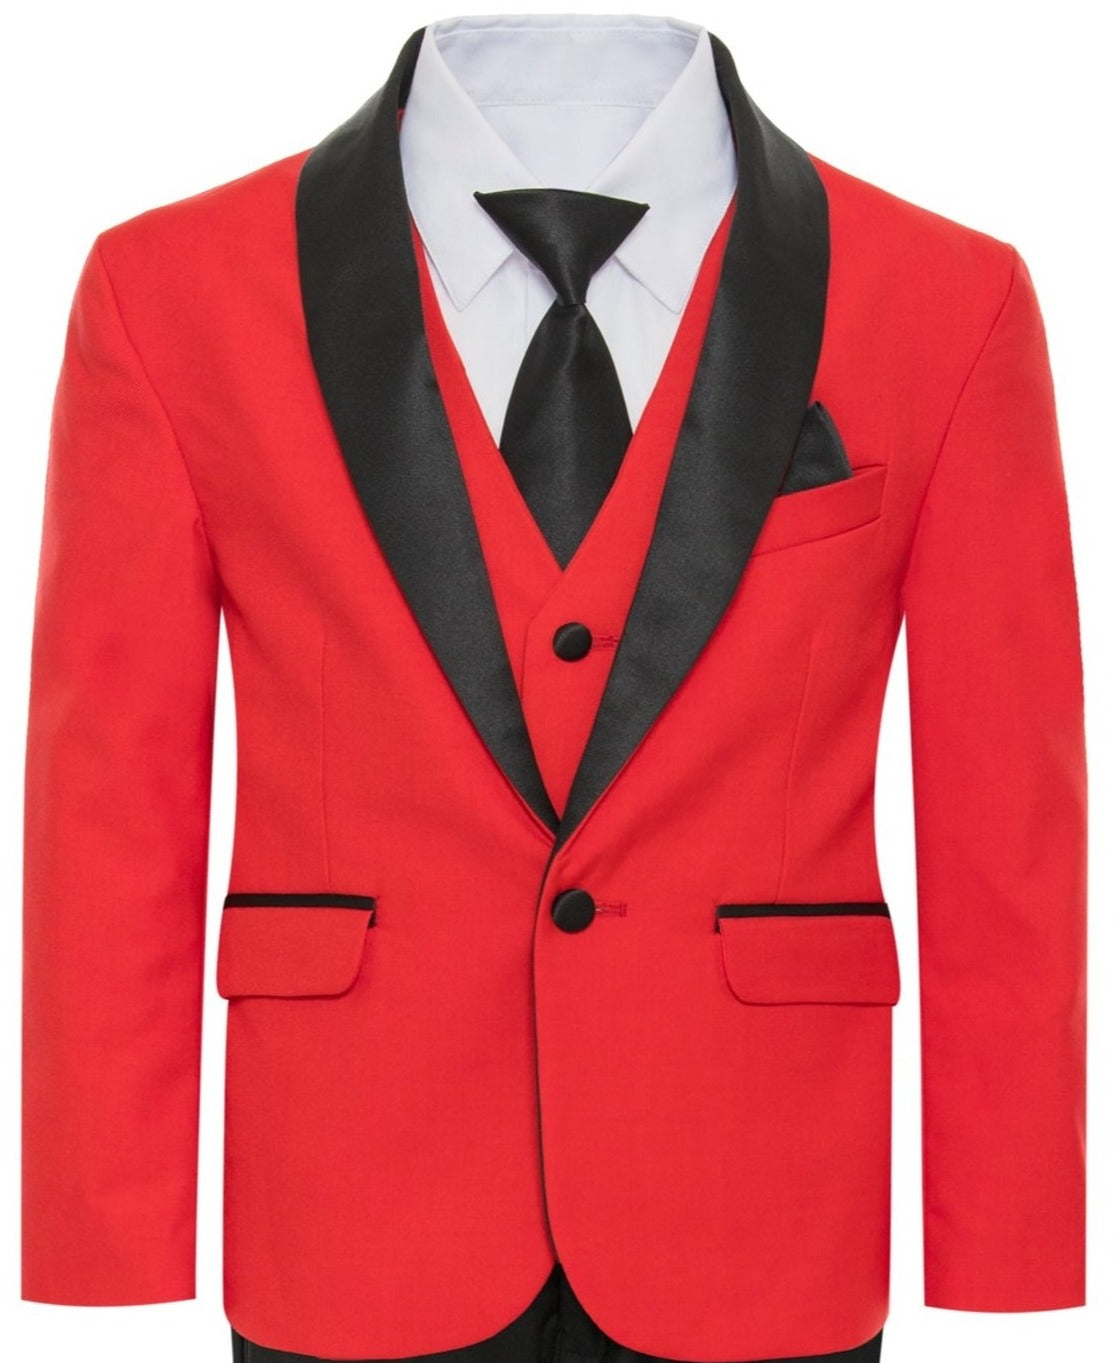 The Red/Black Shawl Tuxedo Suit, a bold statement of style and confidence for a boy.